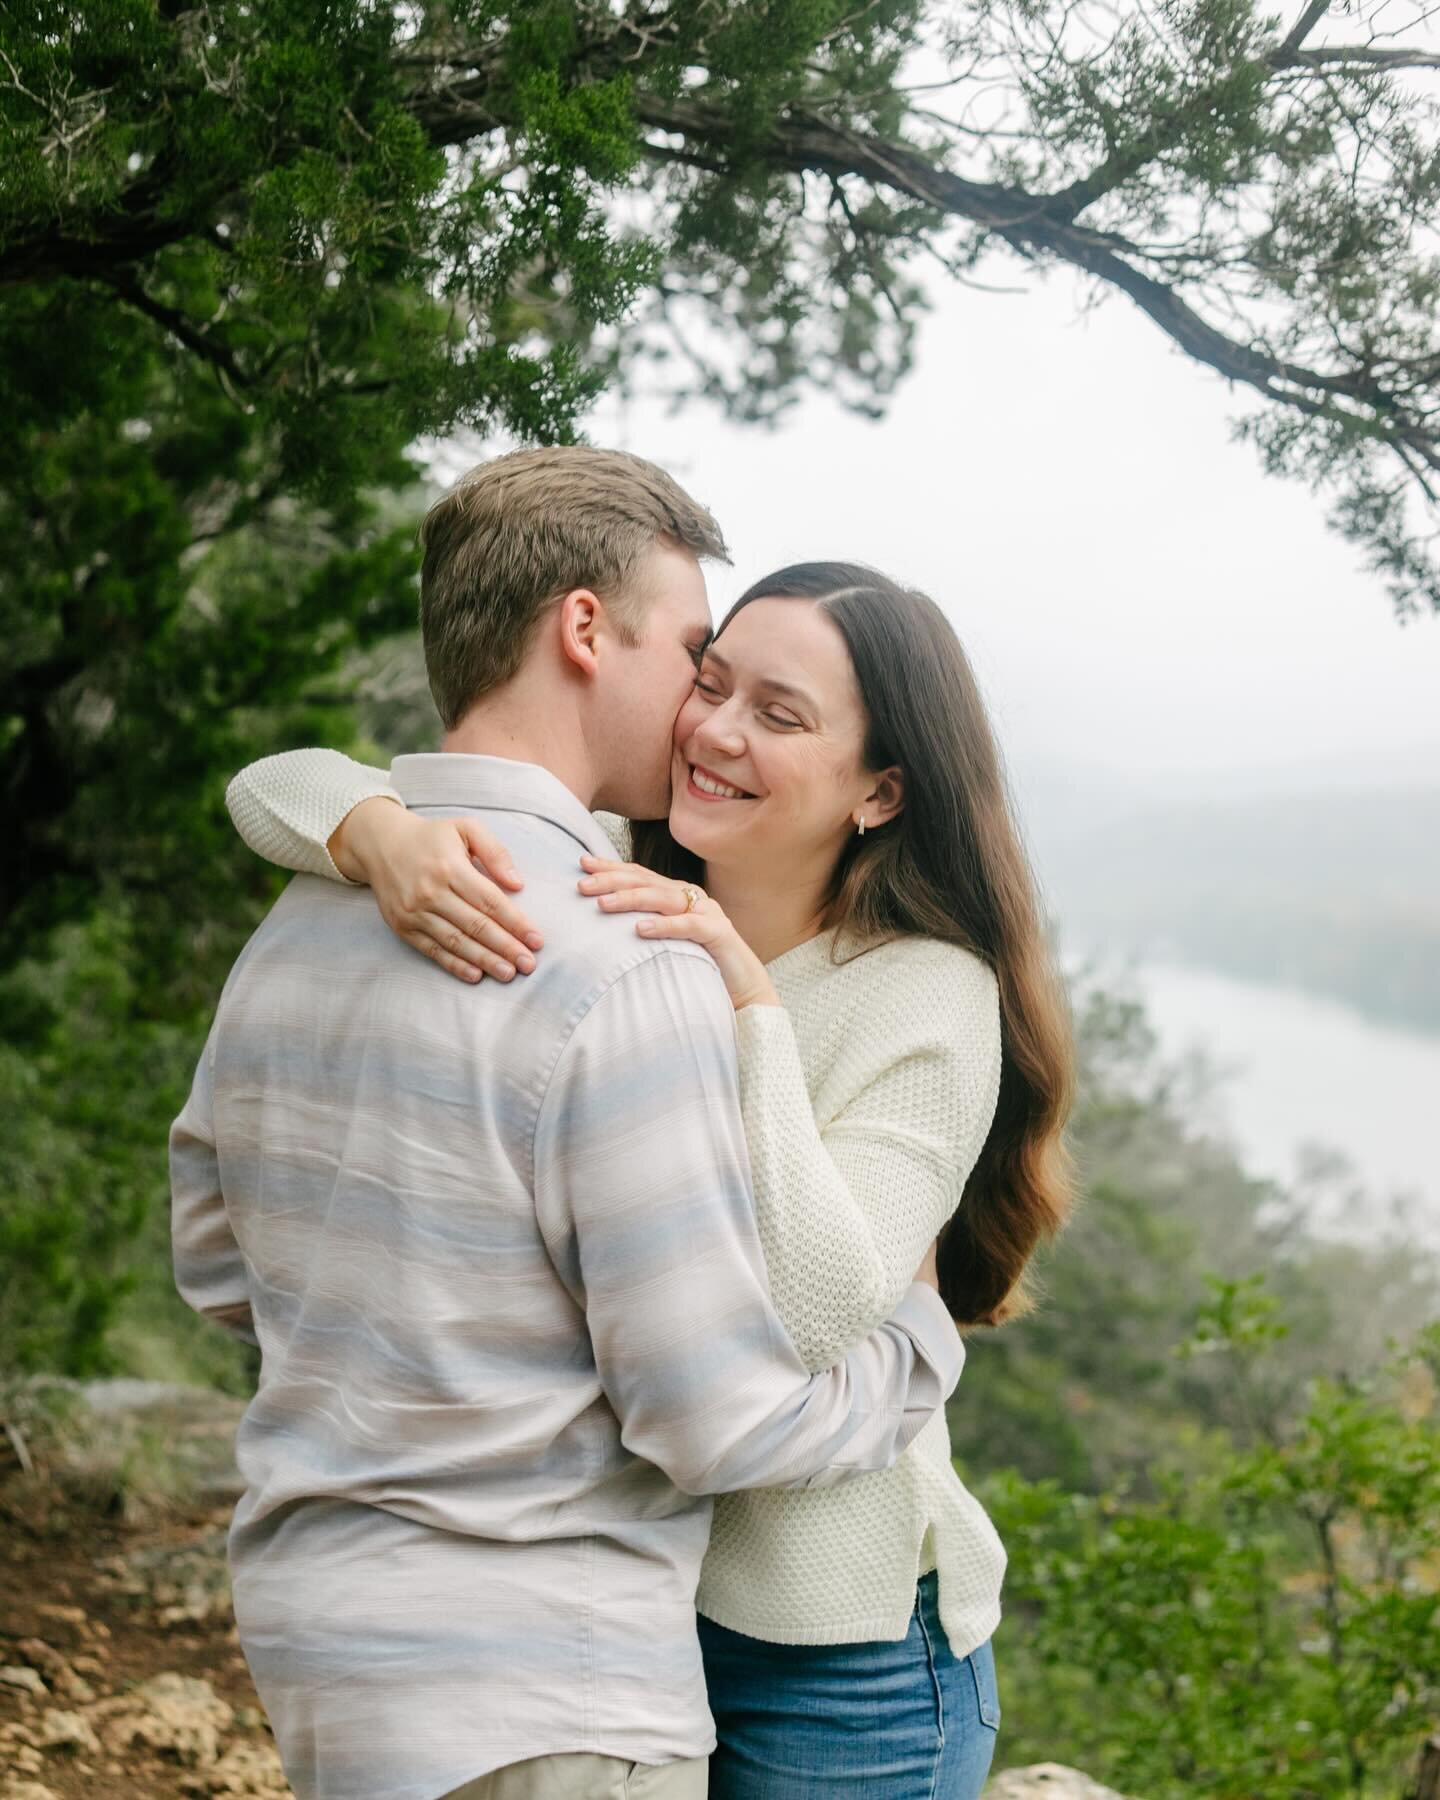 Gallery delivery for Sarah and Mason! Simply too many to pick from with these stunning hill country views and of course the stunning couple too 🥰

#austinengagementphotographer #houstonengagementphotographer #sugarlandengagementphotographer #houston